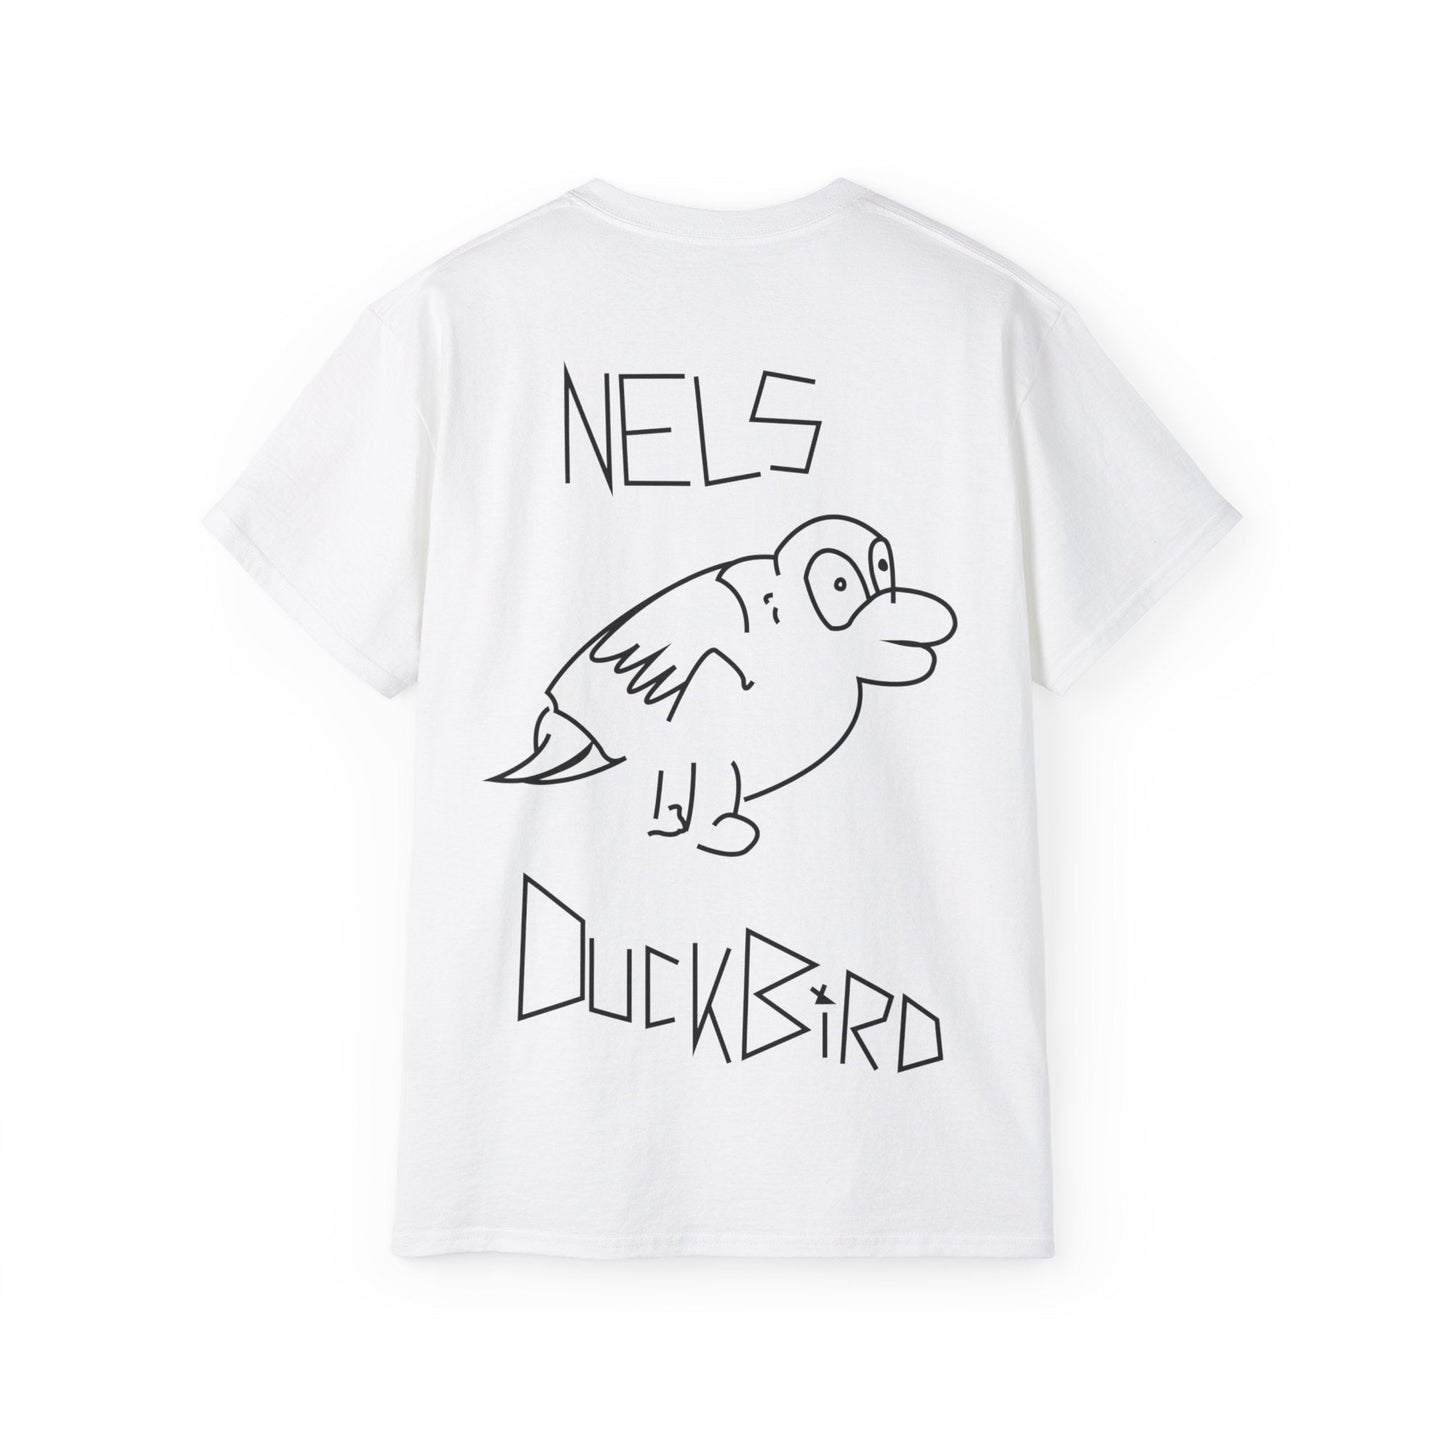 Tee NELS. 'Duckbird' Front and Back - NELS.